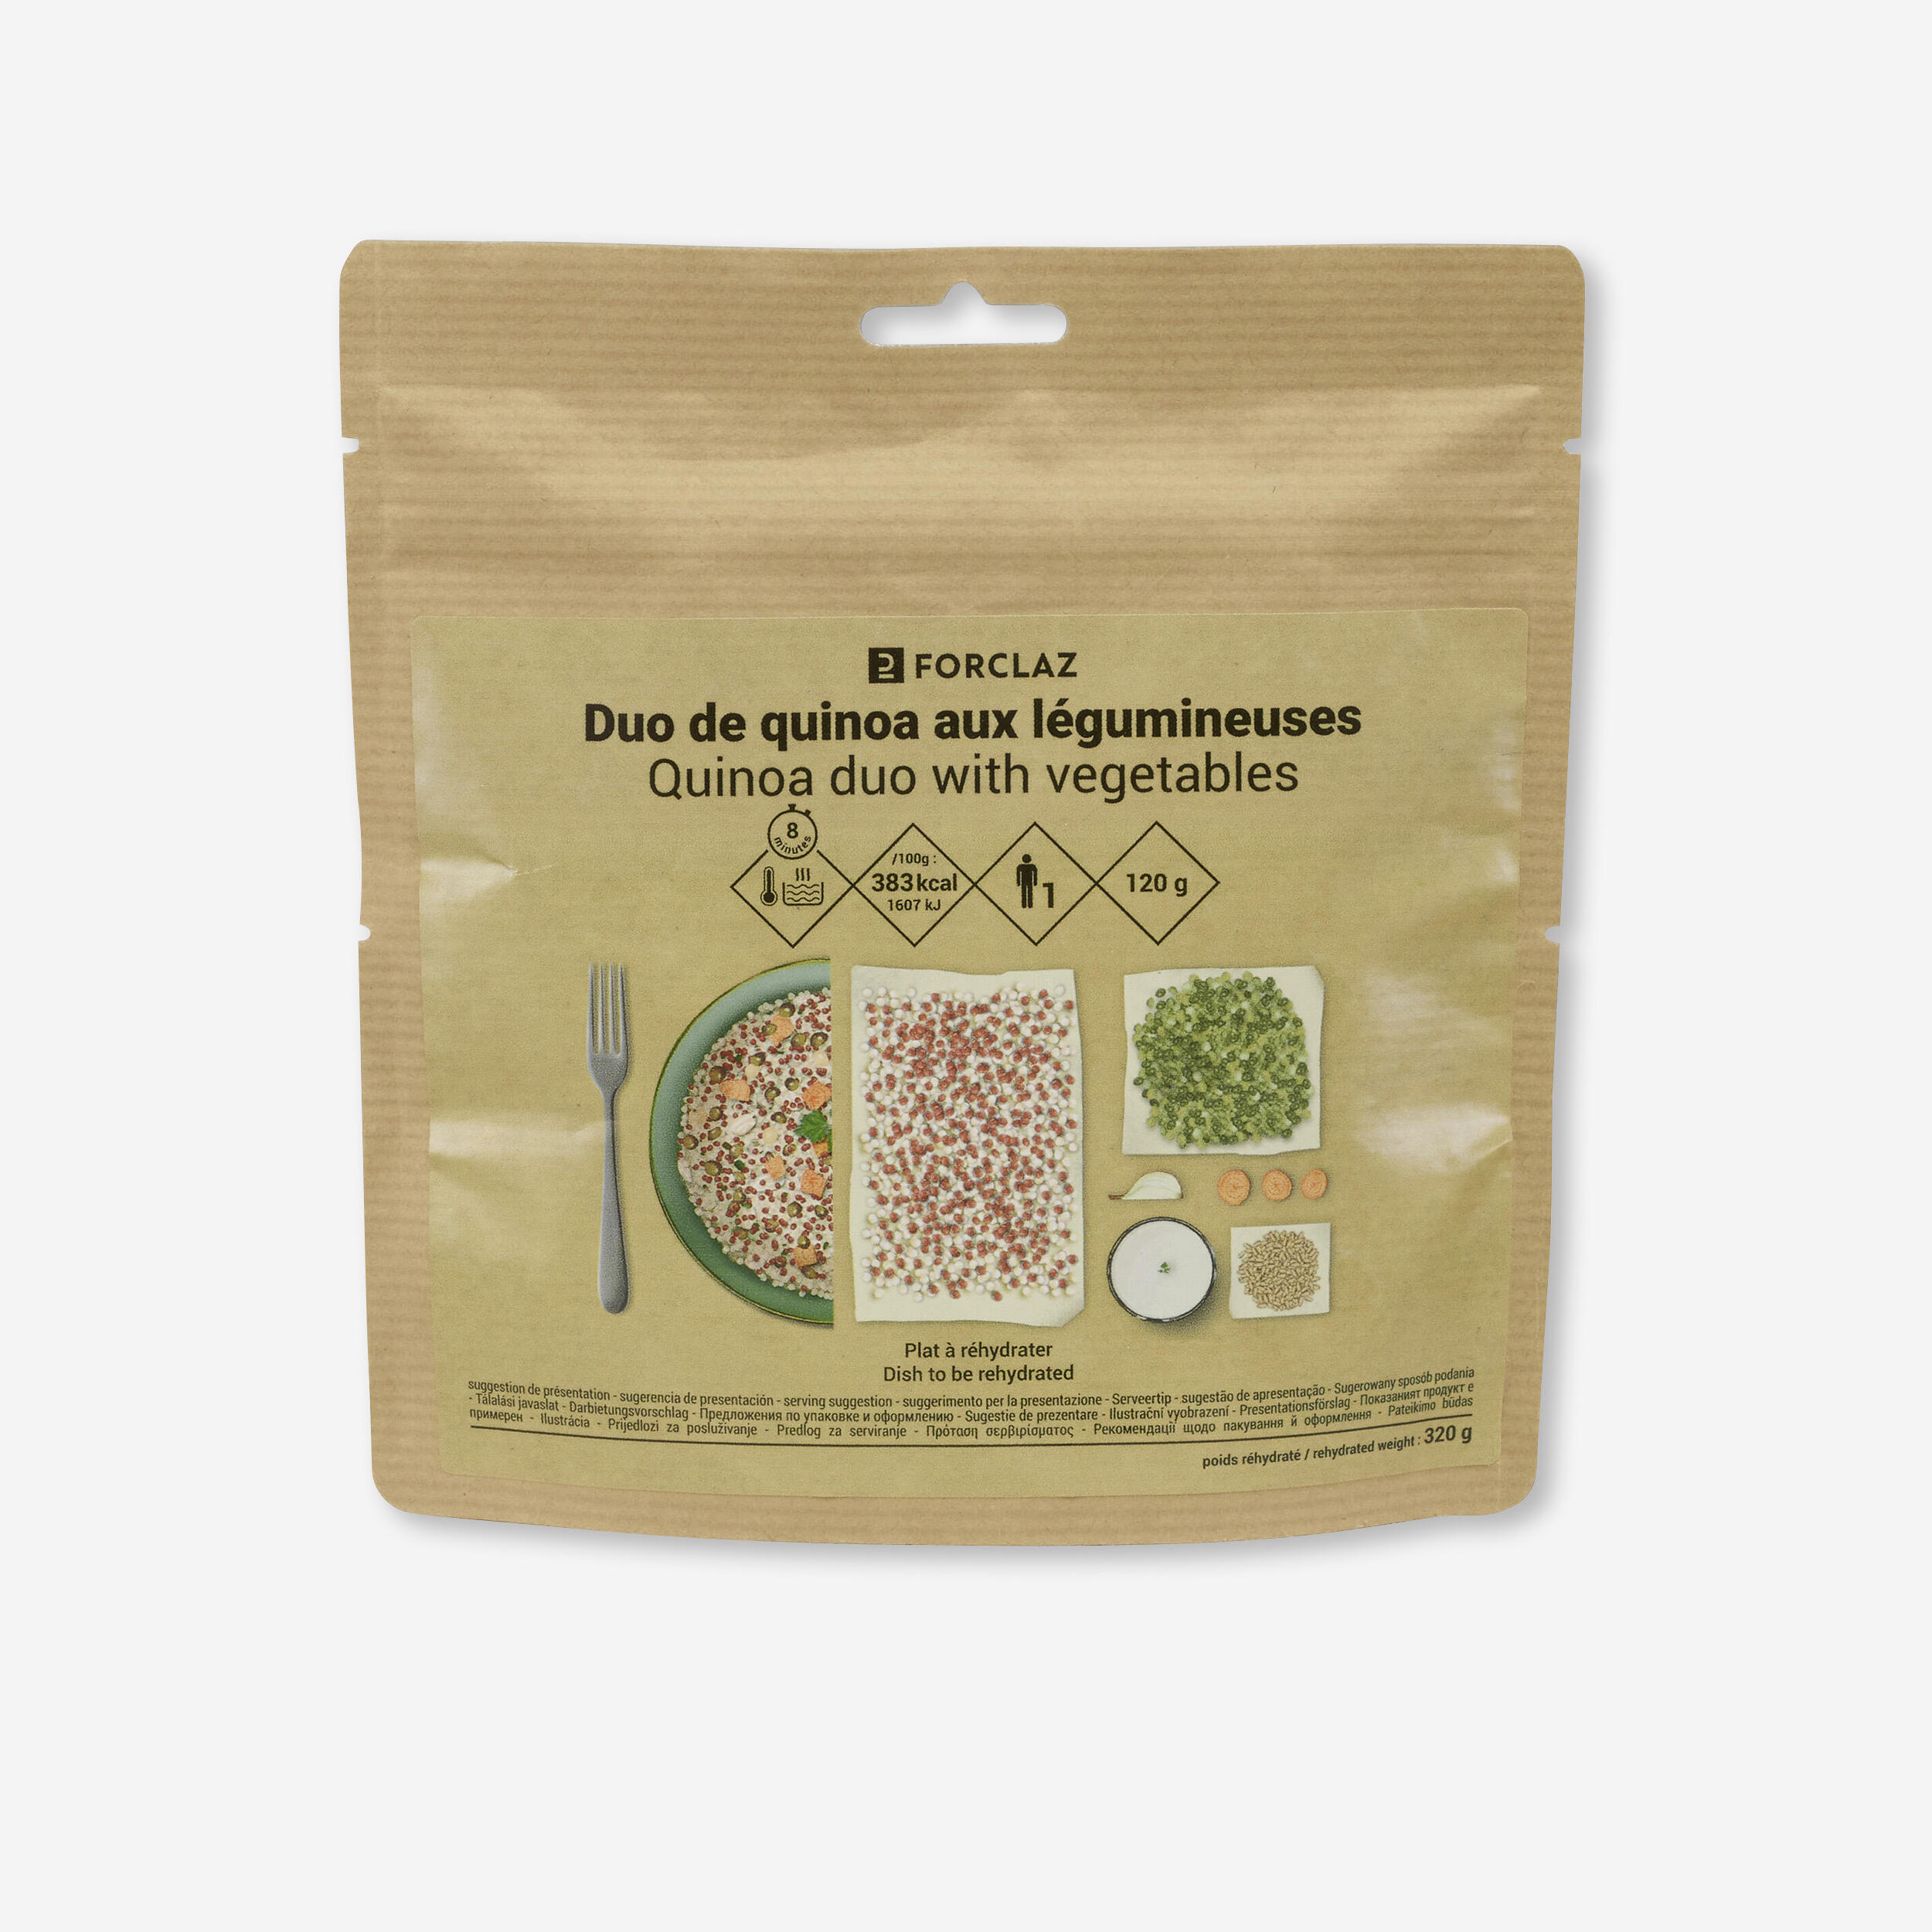 FORCLAZ Vegetarian Dehydrated Meal - Vegetable Quinoa Duo - 120 g